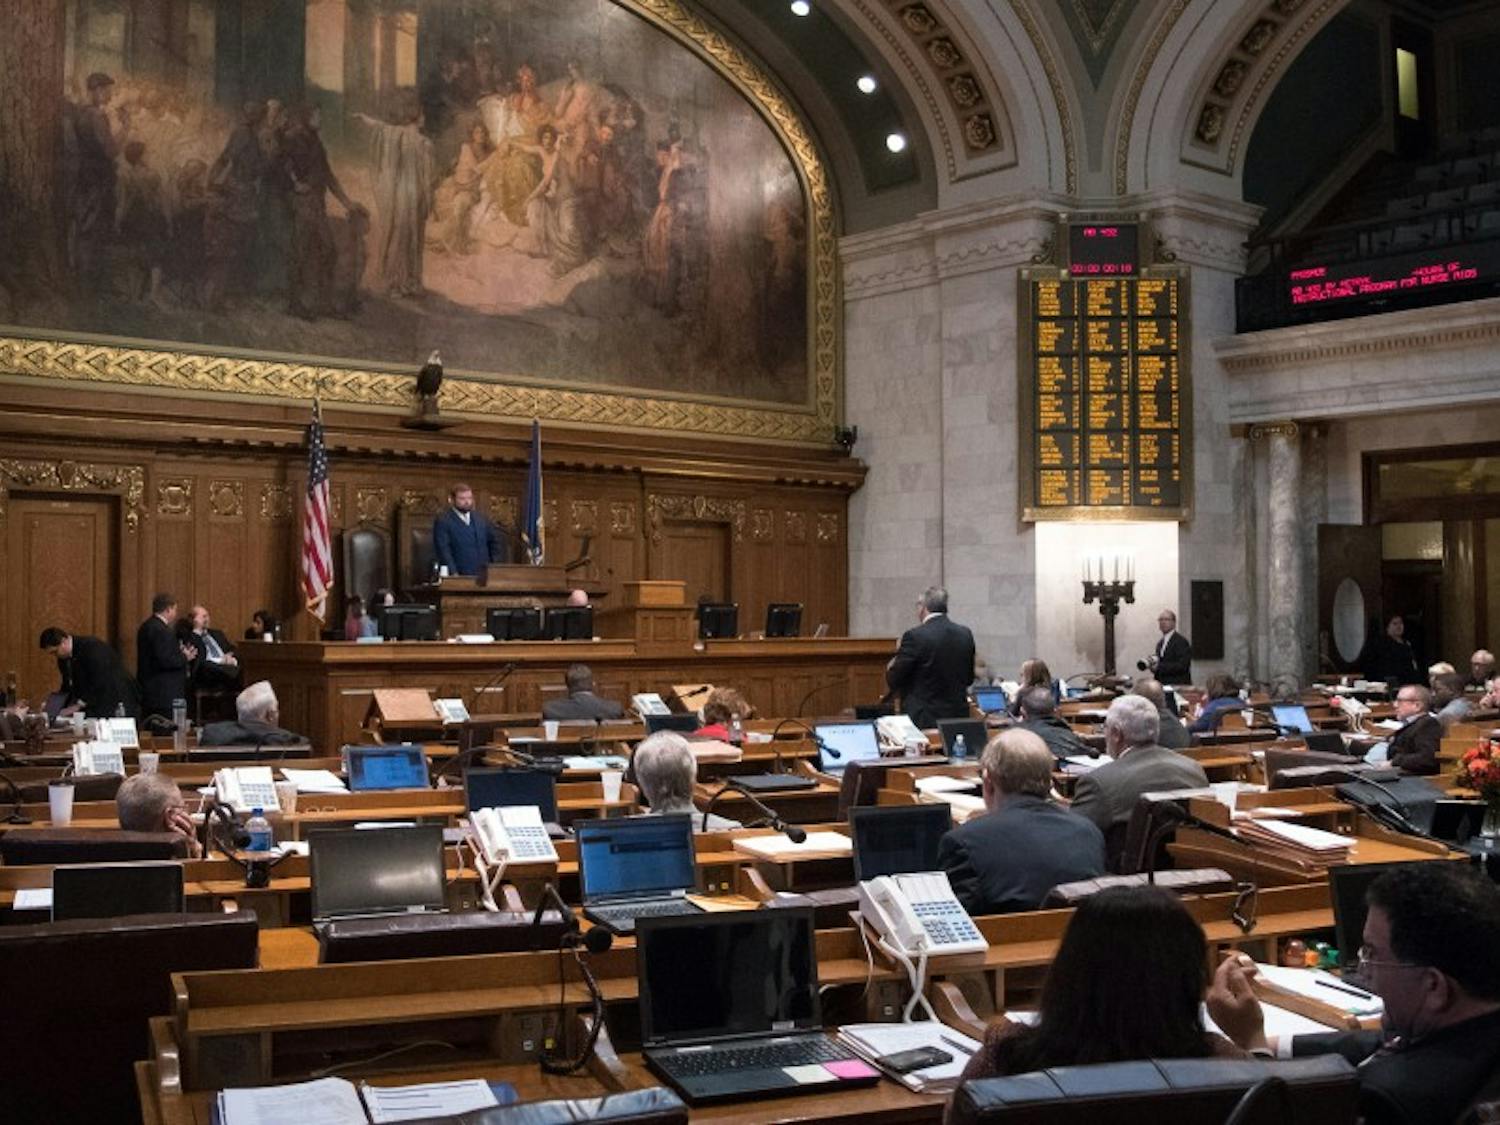 The state Assembly passed a bill Thursday that would prohibit state insurance programs from covering the cost of induced abortions except in certain circumstances.